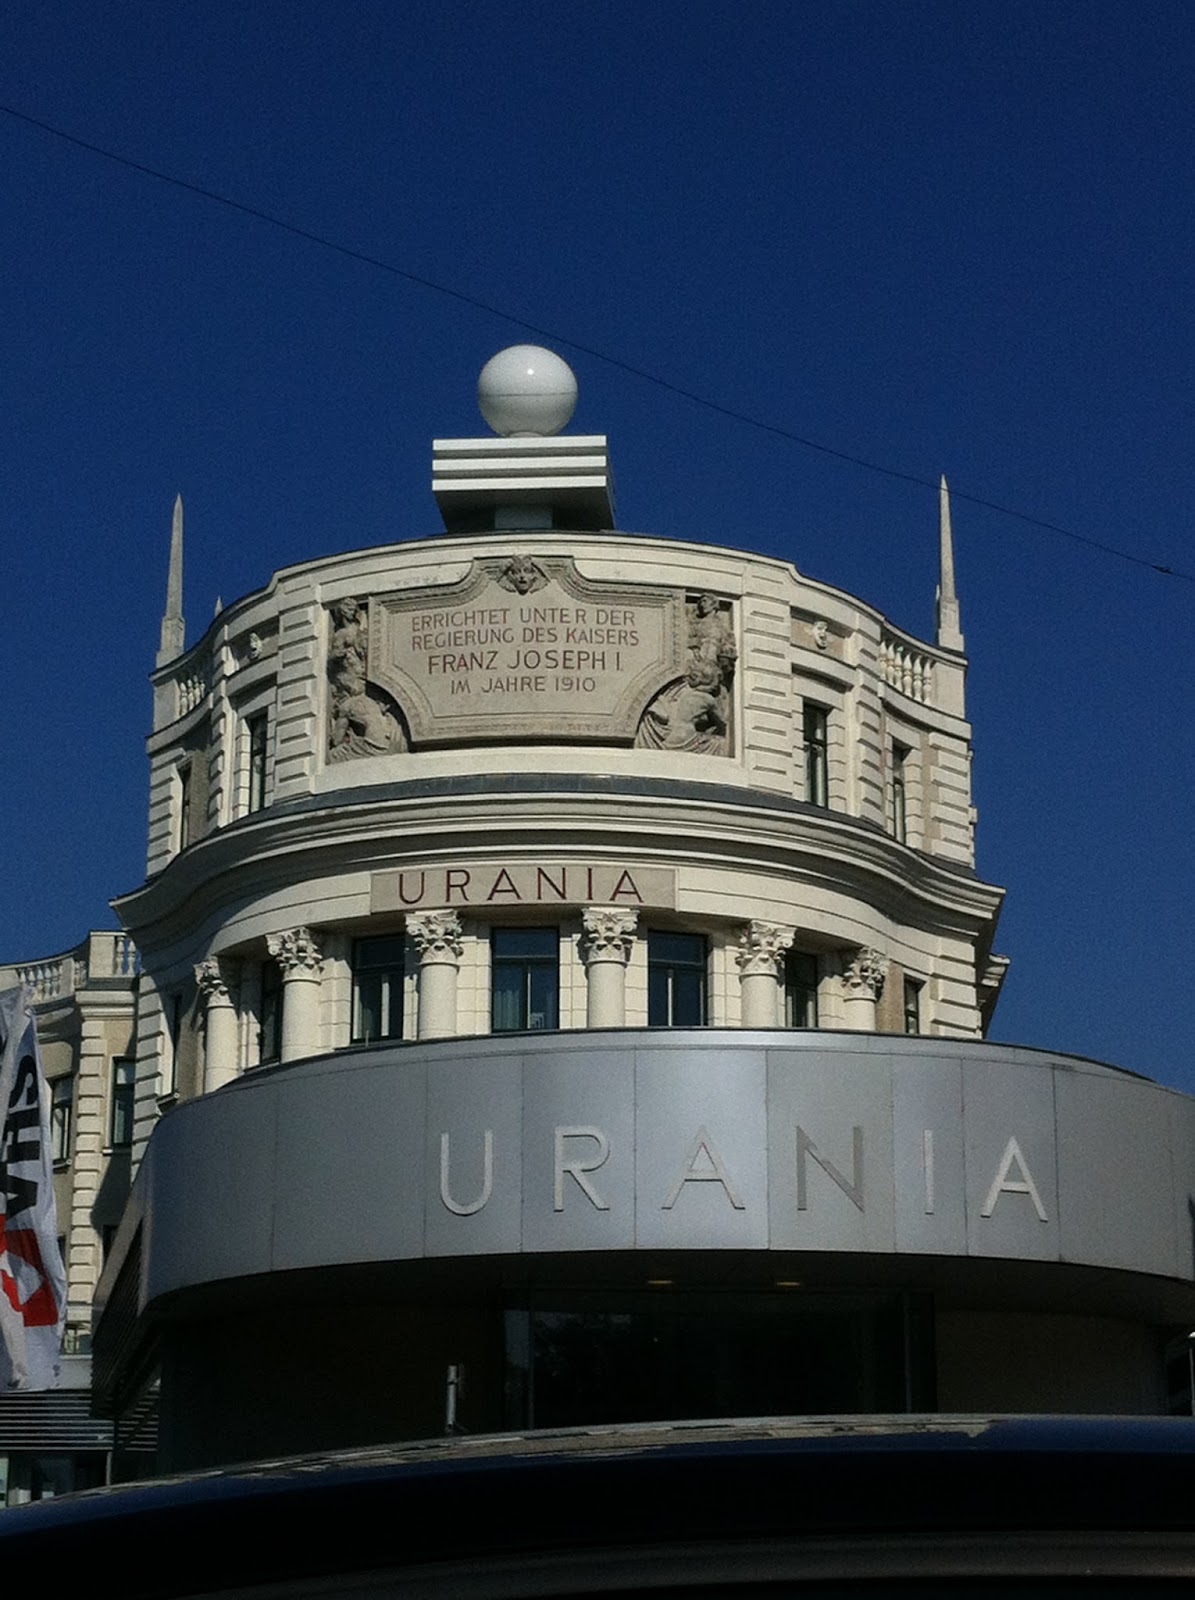 Urania building by the Danube canal